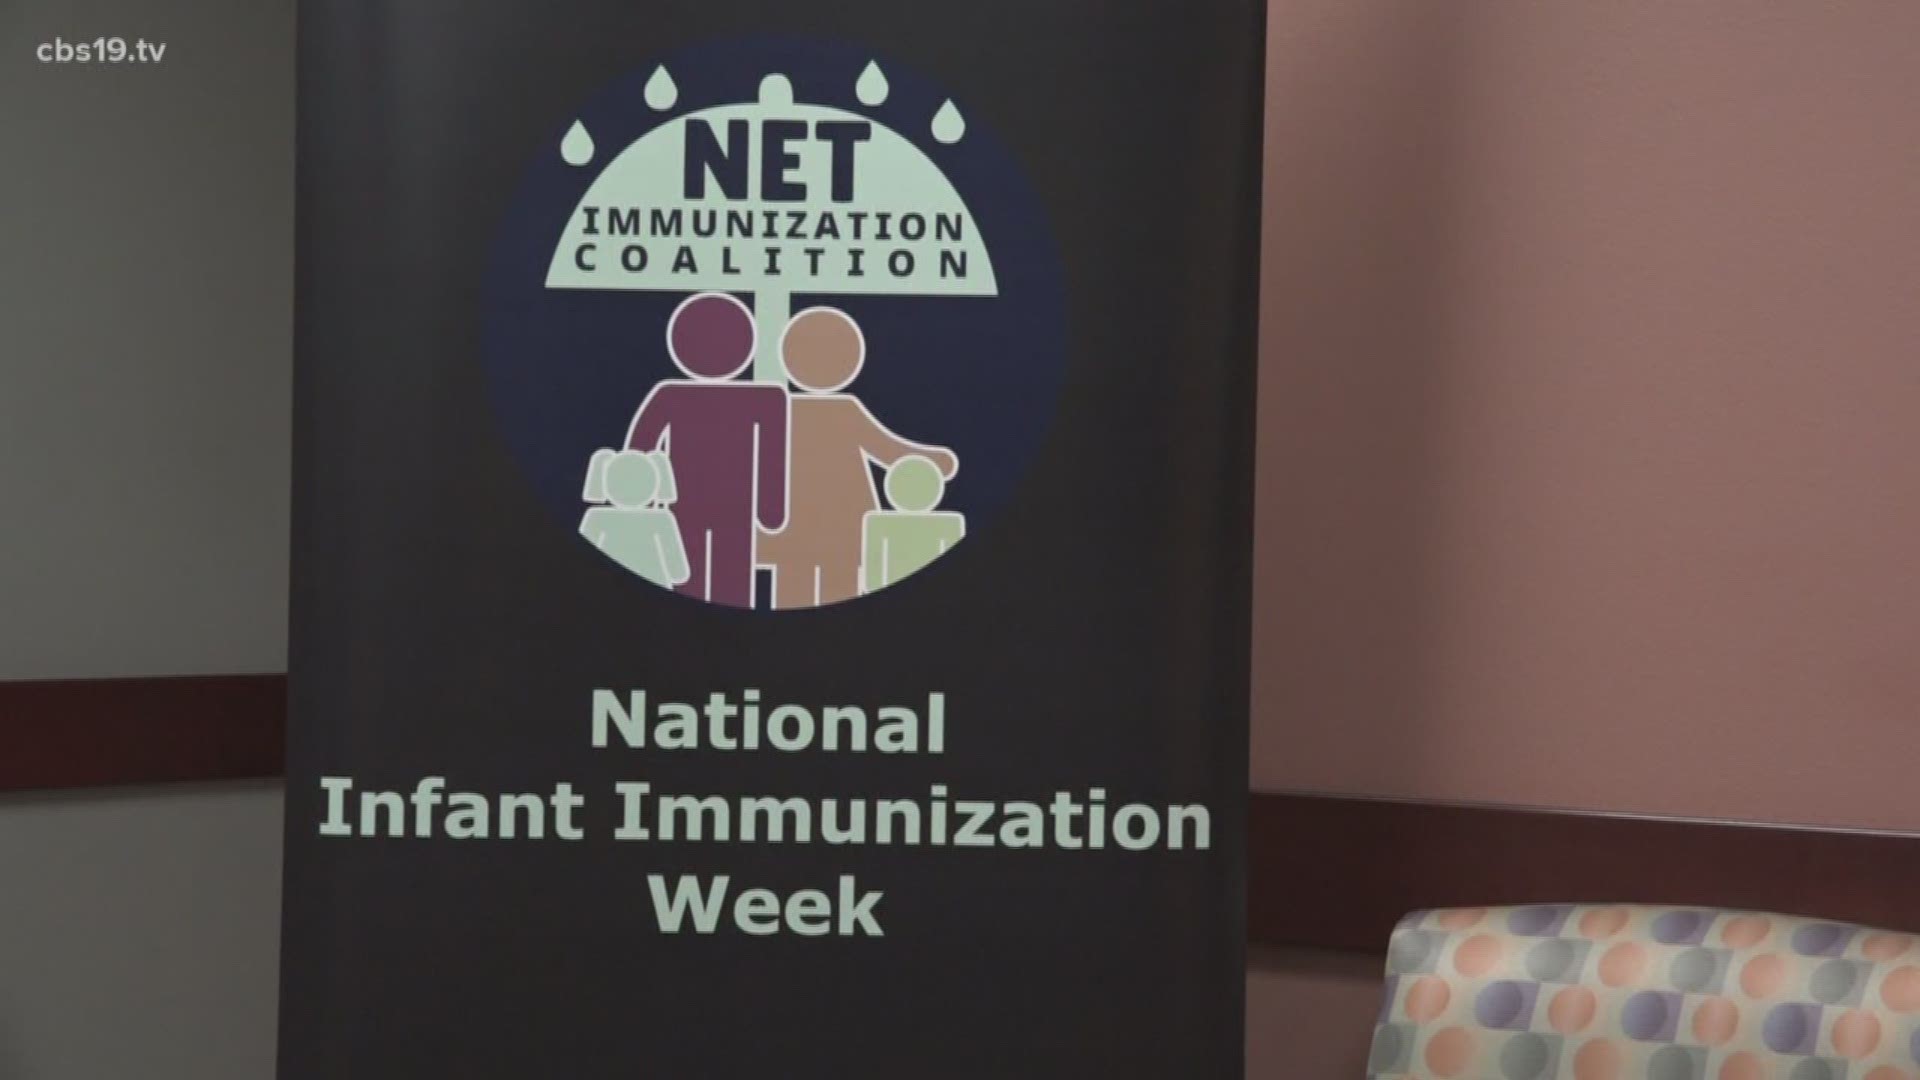 Health care professionals are using this time to remind the public to immunize their children.